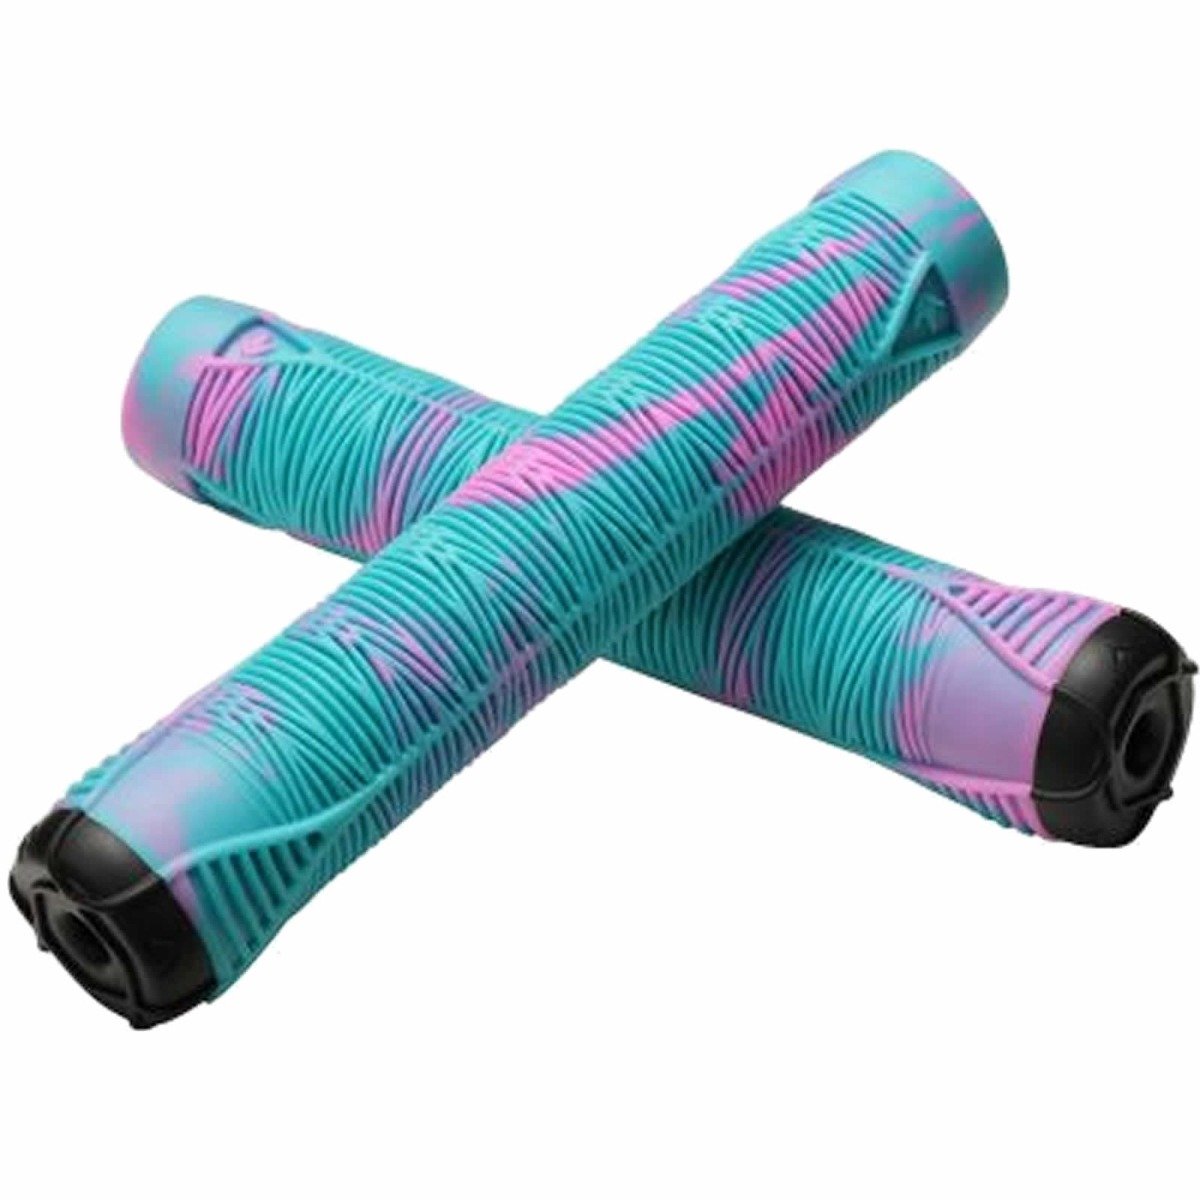 An image of Blunt Envy Teal Blue / Pink Flangeless V2 Scooter Bar Grips with Aluminium / Ste...